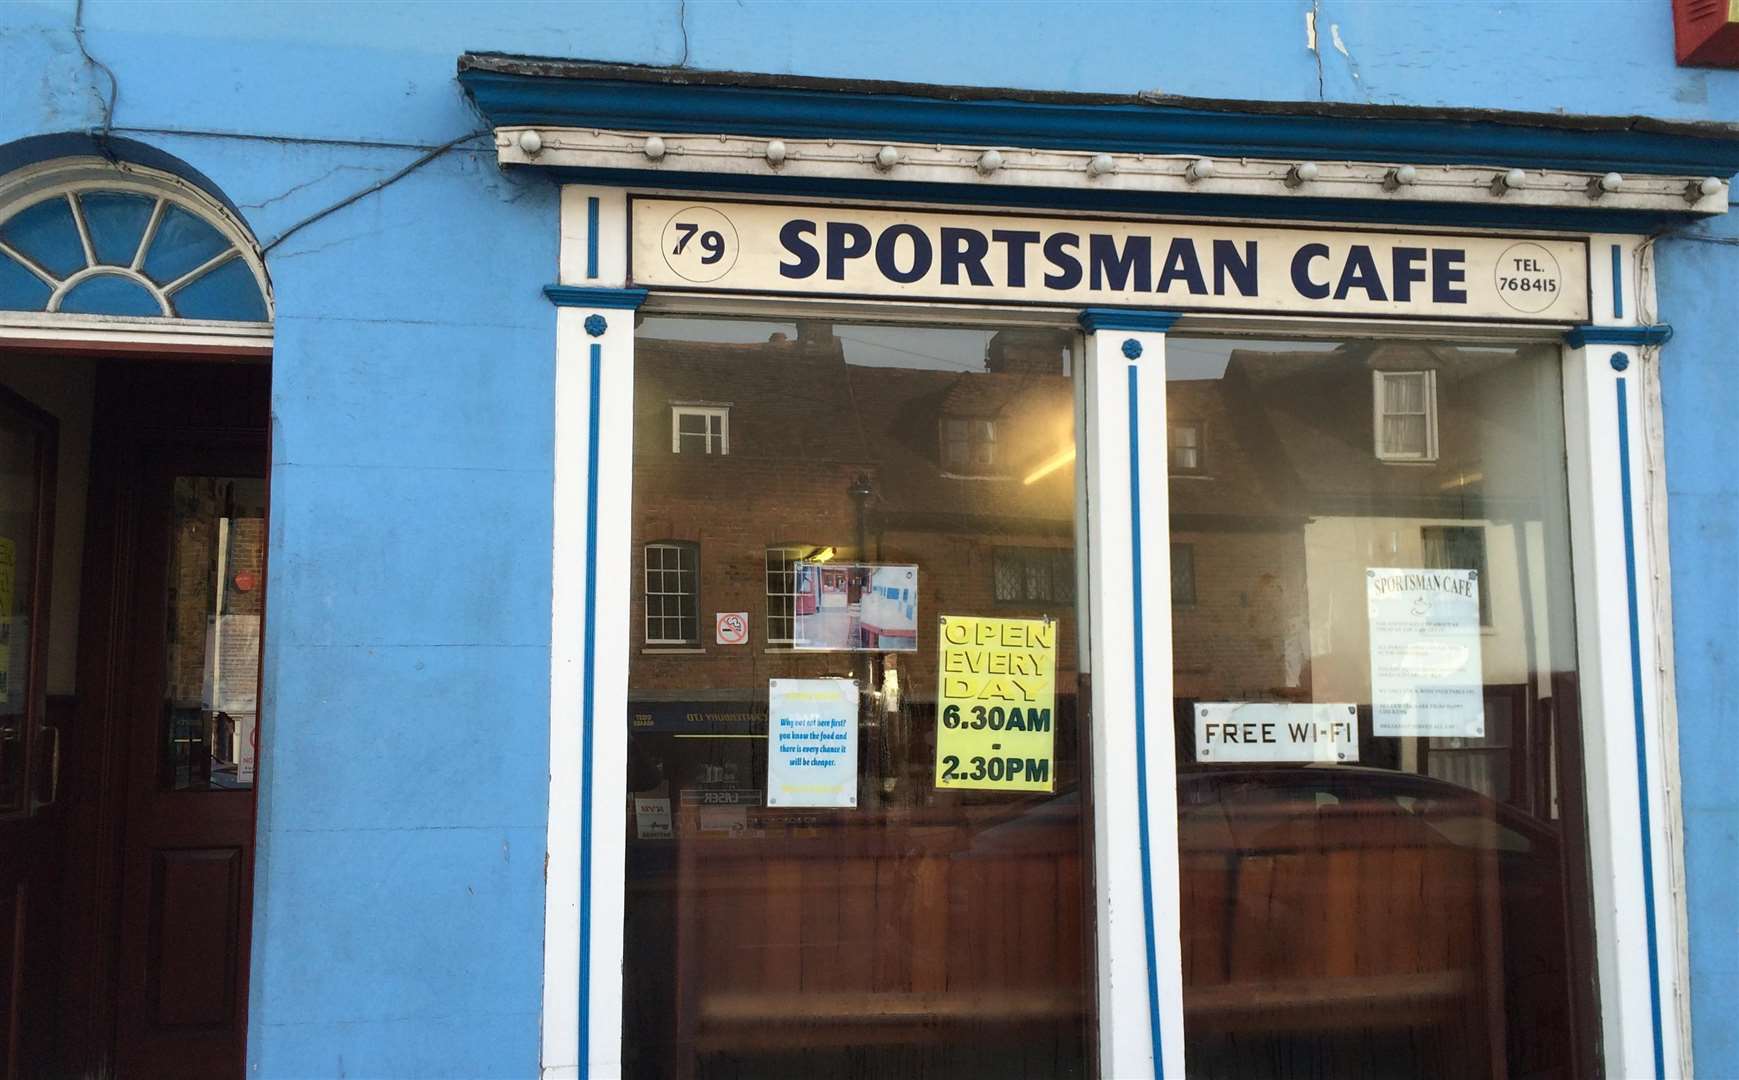 The Sportsman Cafe